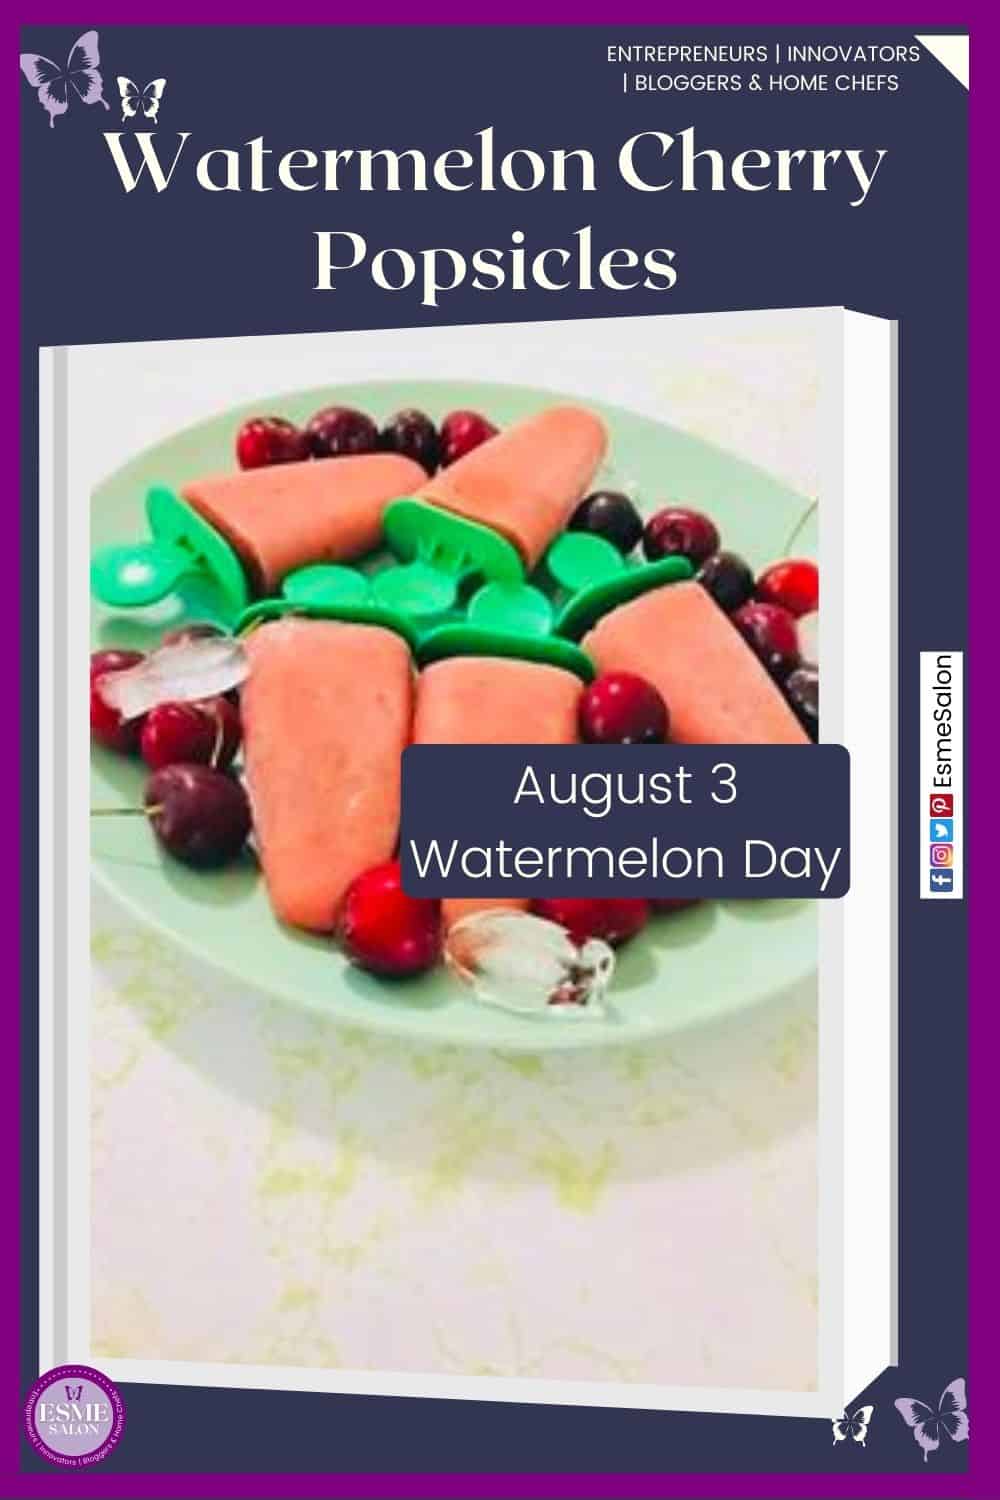 an image of Watermelon and Cherry Popsicles with cherries and ice on the side